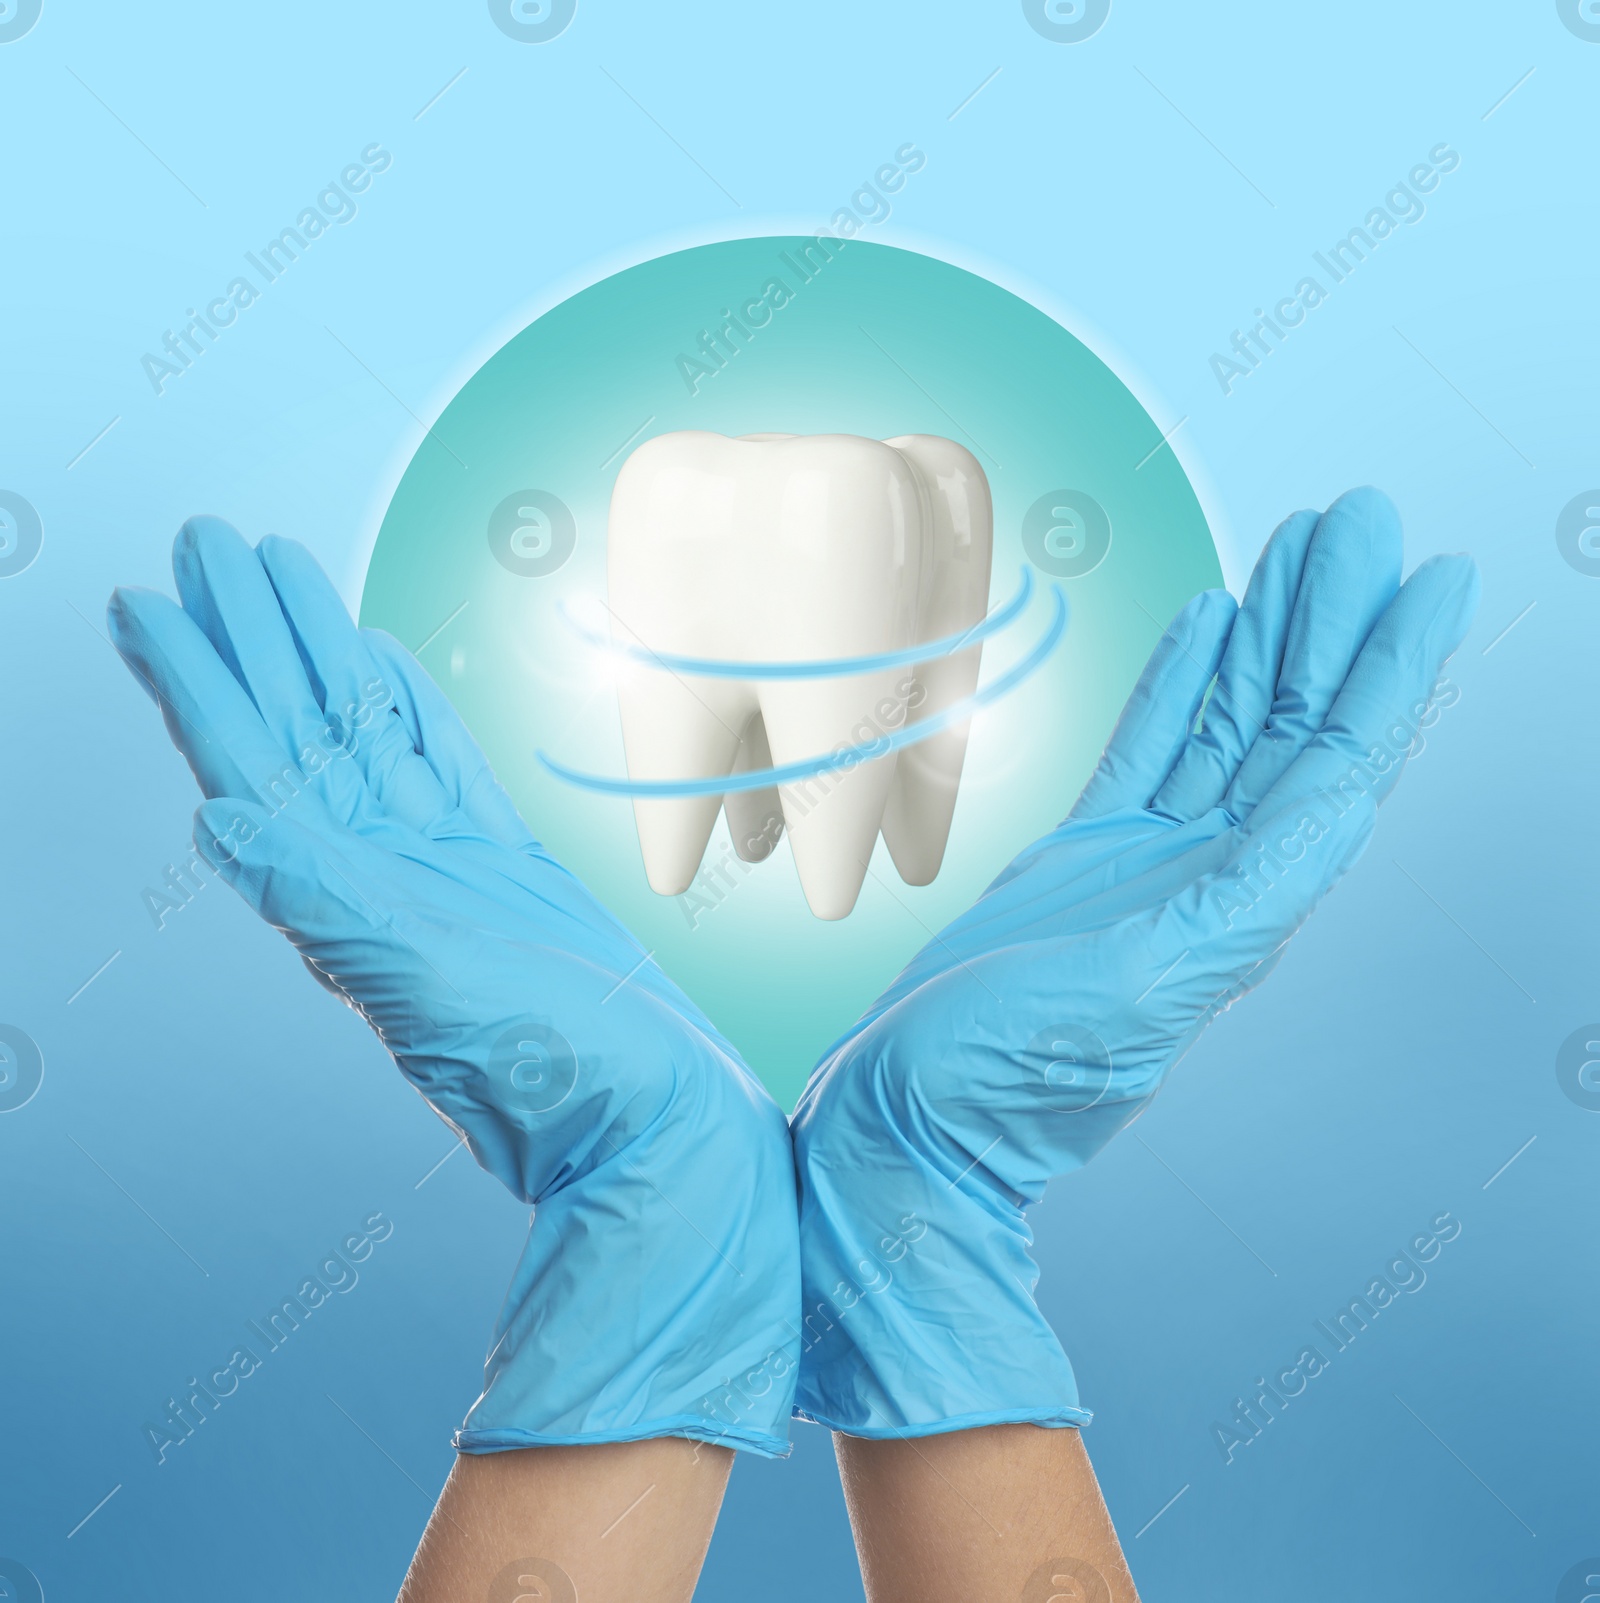 Image of Dentist demonstrating virtual model of healthy tooth on light blue background, closeup